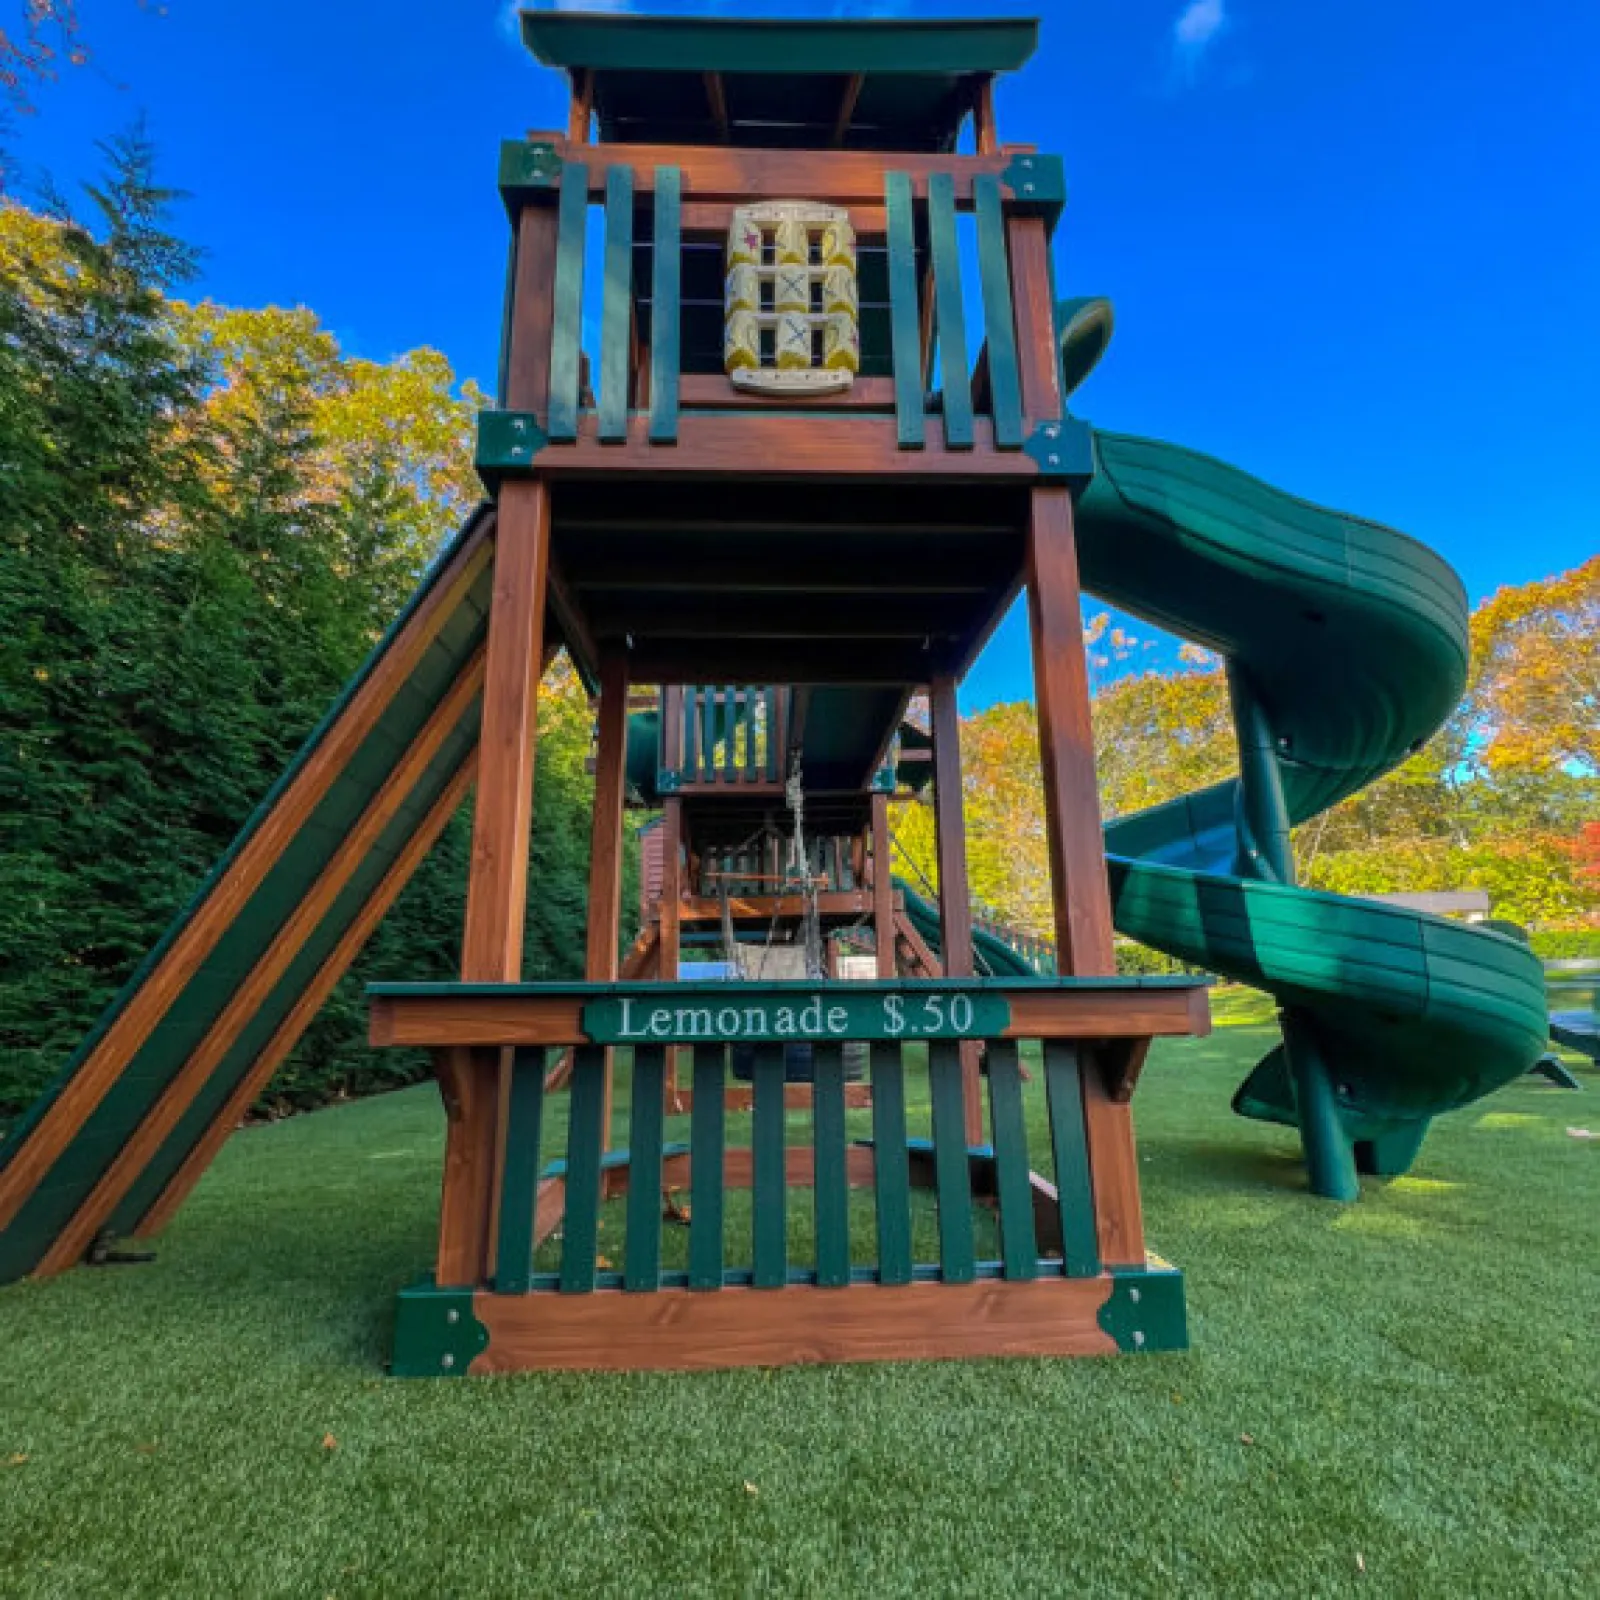 a small play structure in a grassy area